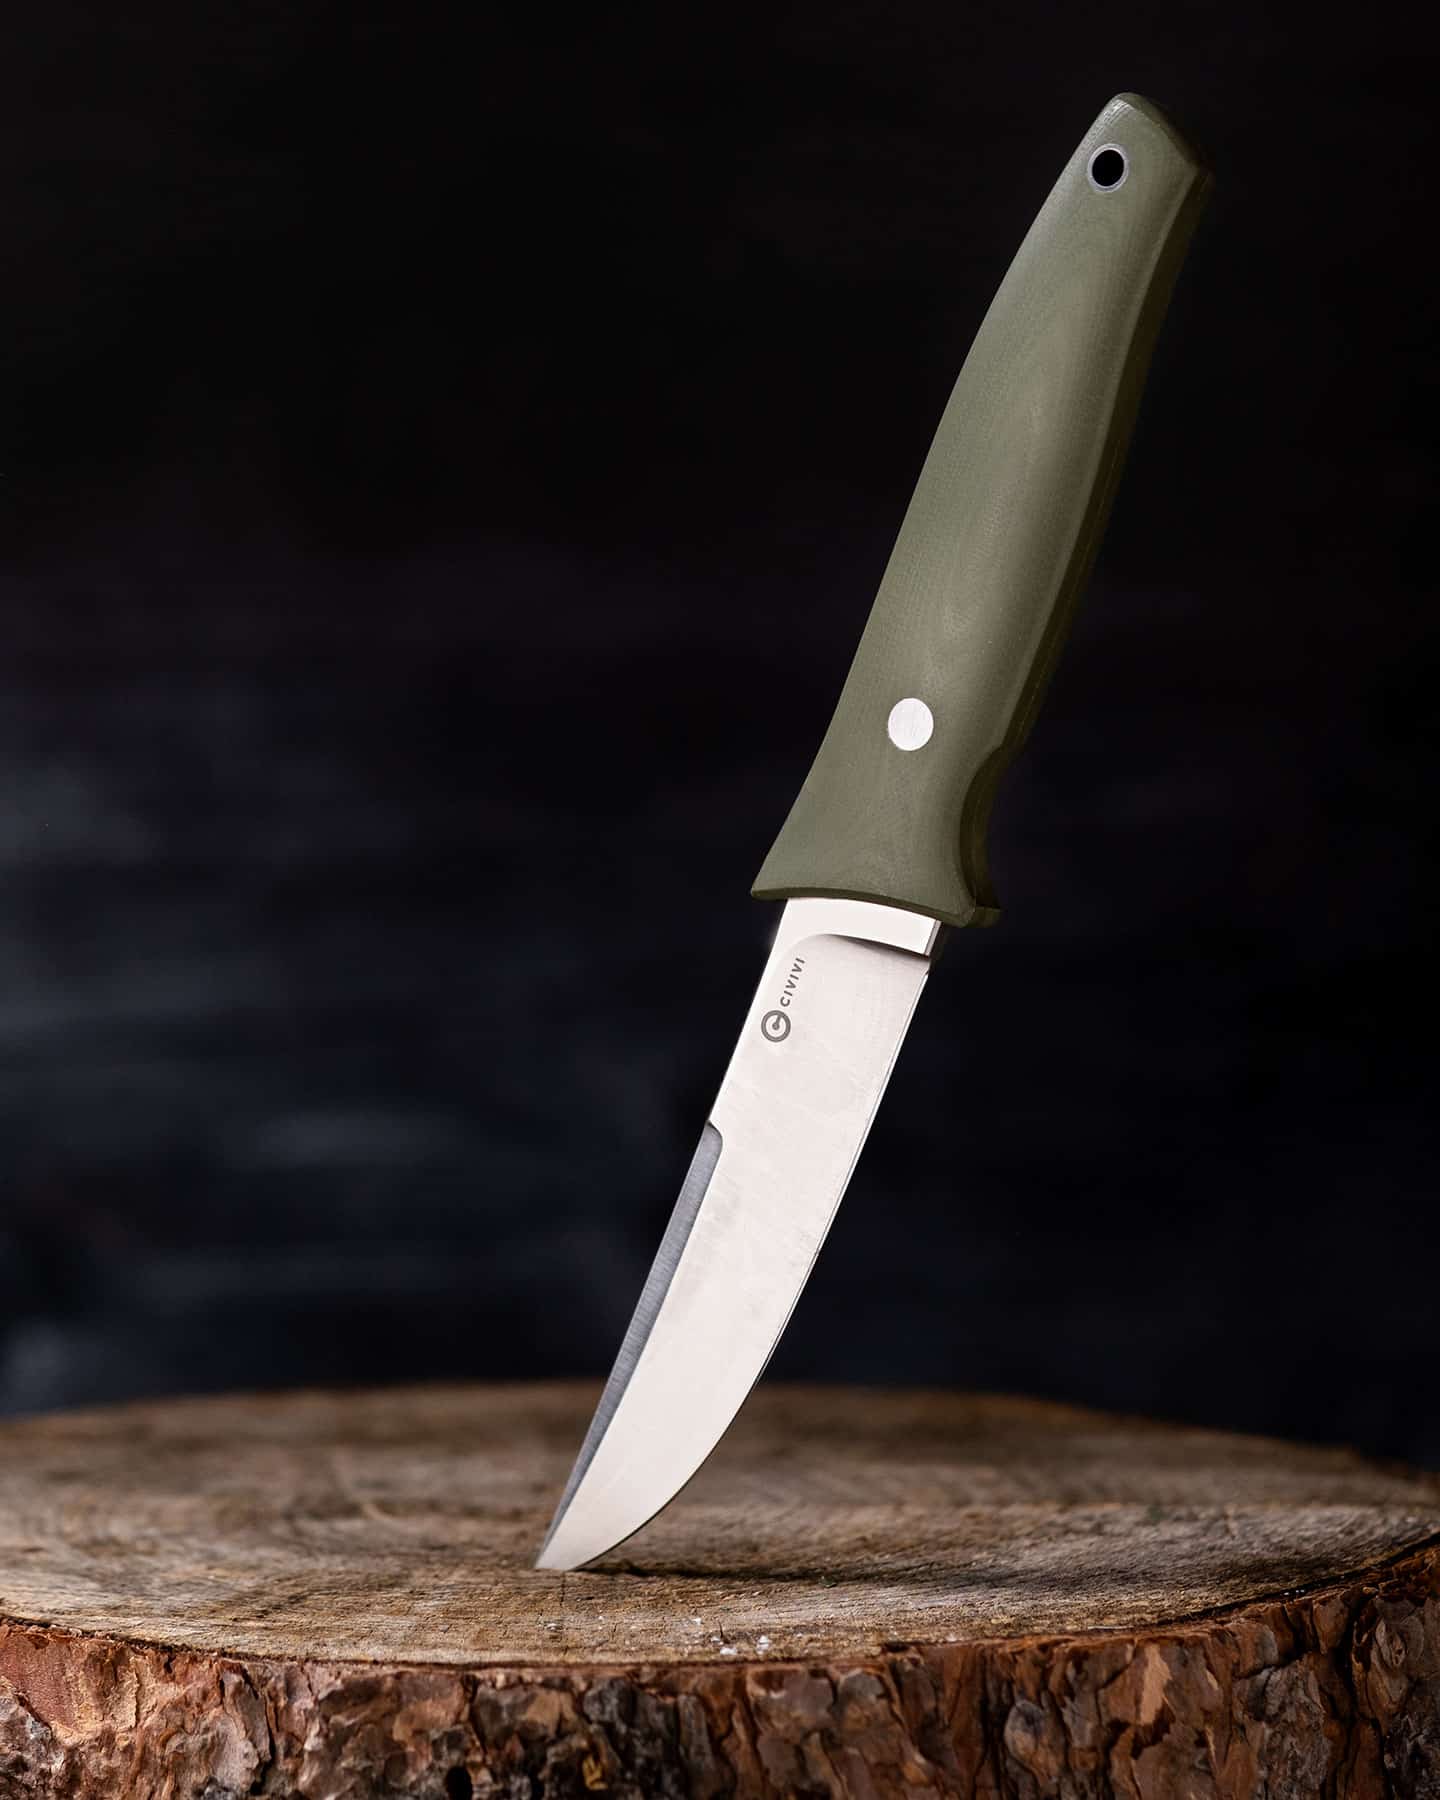 The Civivi Tamashii by Terzuola is an award winning tactical fixed blade that doubles as a practical outdoor tool.